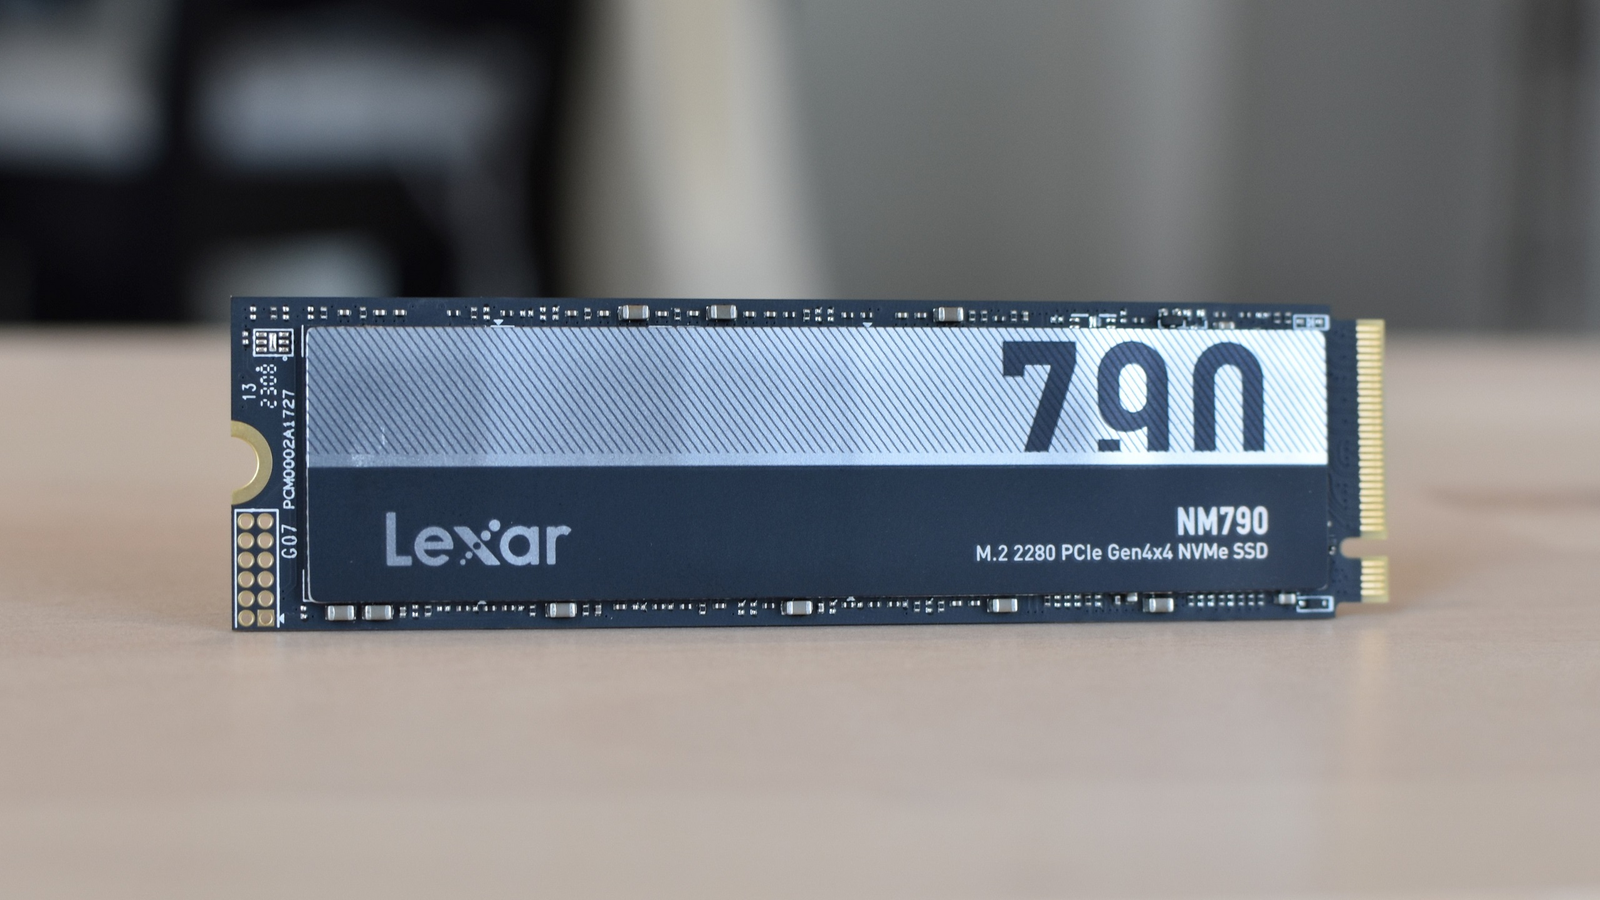 This 4TB Lexar NM790 PCIe 4.0 SSD is down to £170.97 with an Ebay 